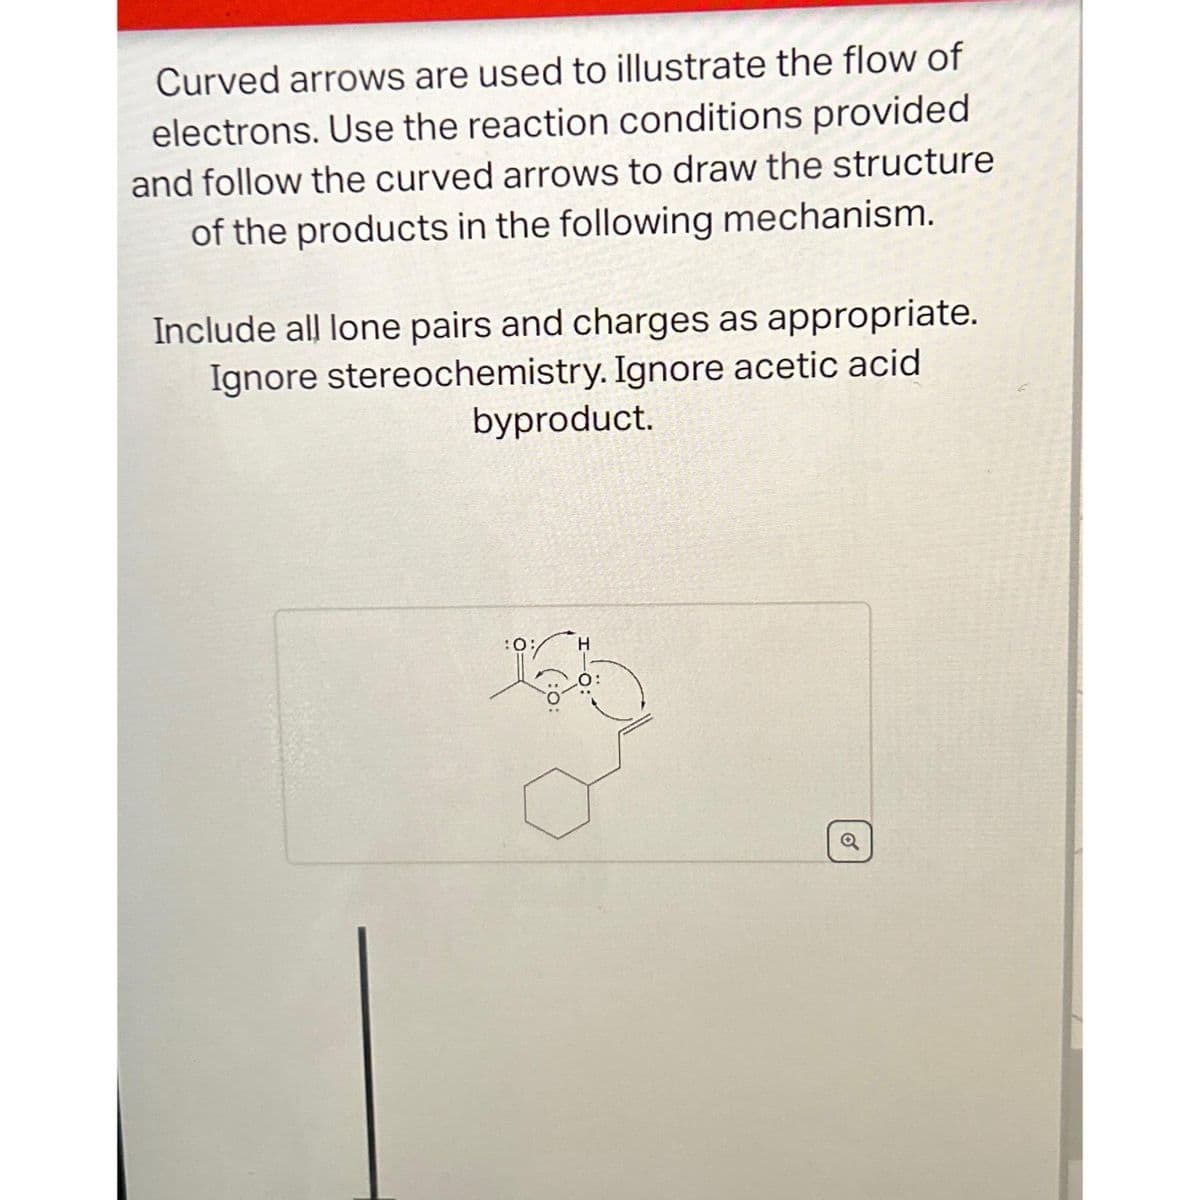 Curved arrows are used to illustrate the flow of
electrons. Use the reaction conditions provided
and follow the curved arrows to draw the structure
of the products in the following mechanism.
Include all lone pairs and charges as appropriate.
Ignore stereochemistry. Ignore acetic acid
byproduct.
:0;
H
o